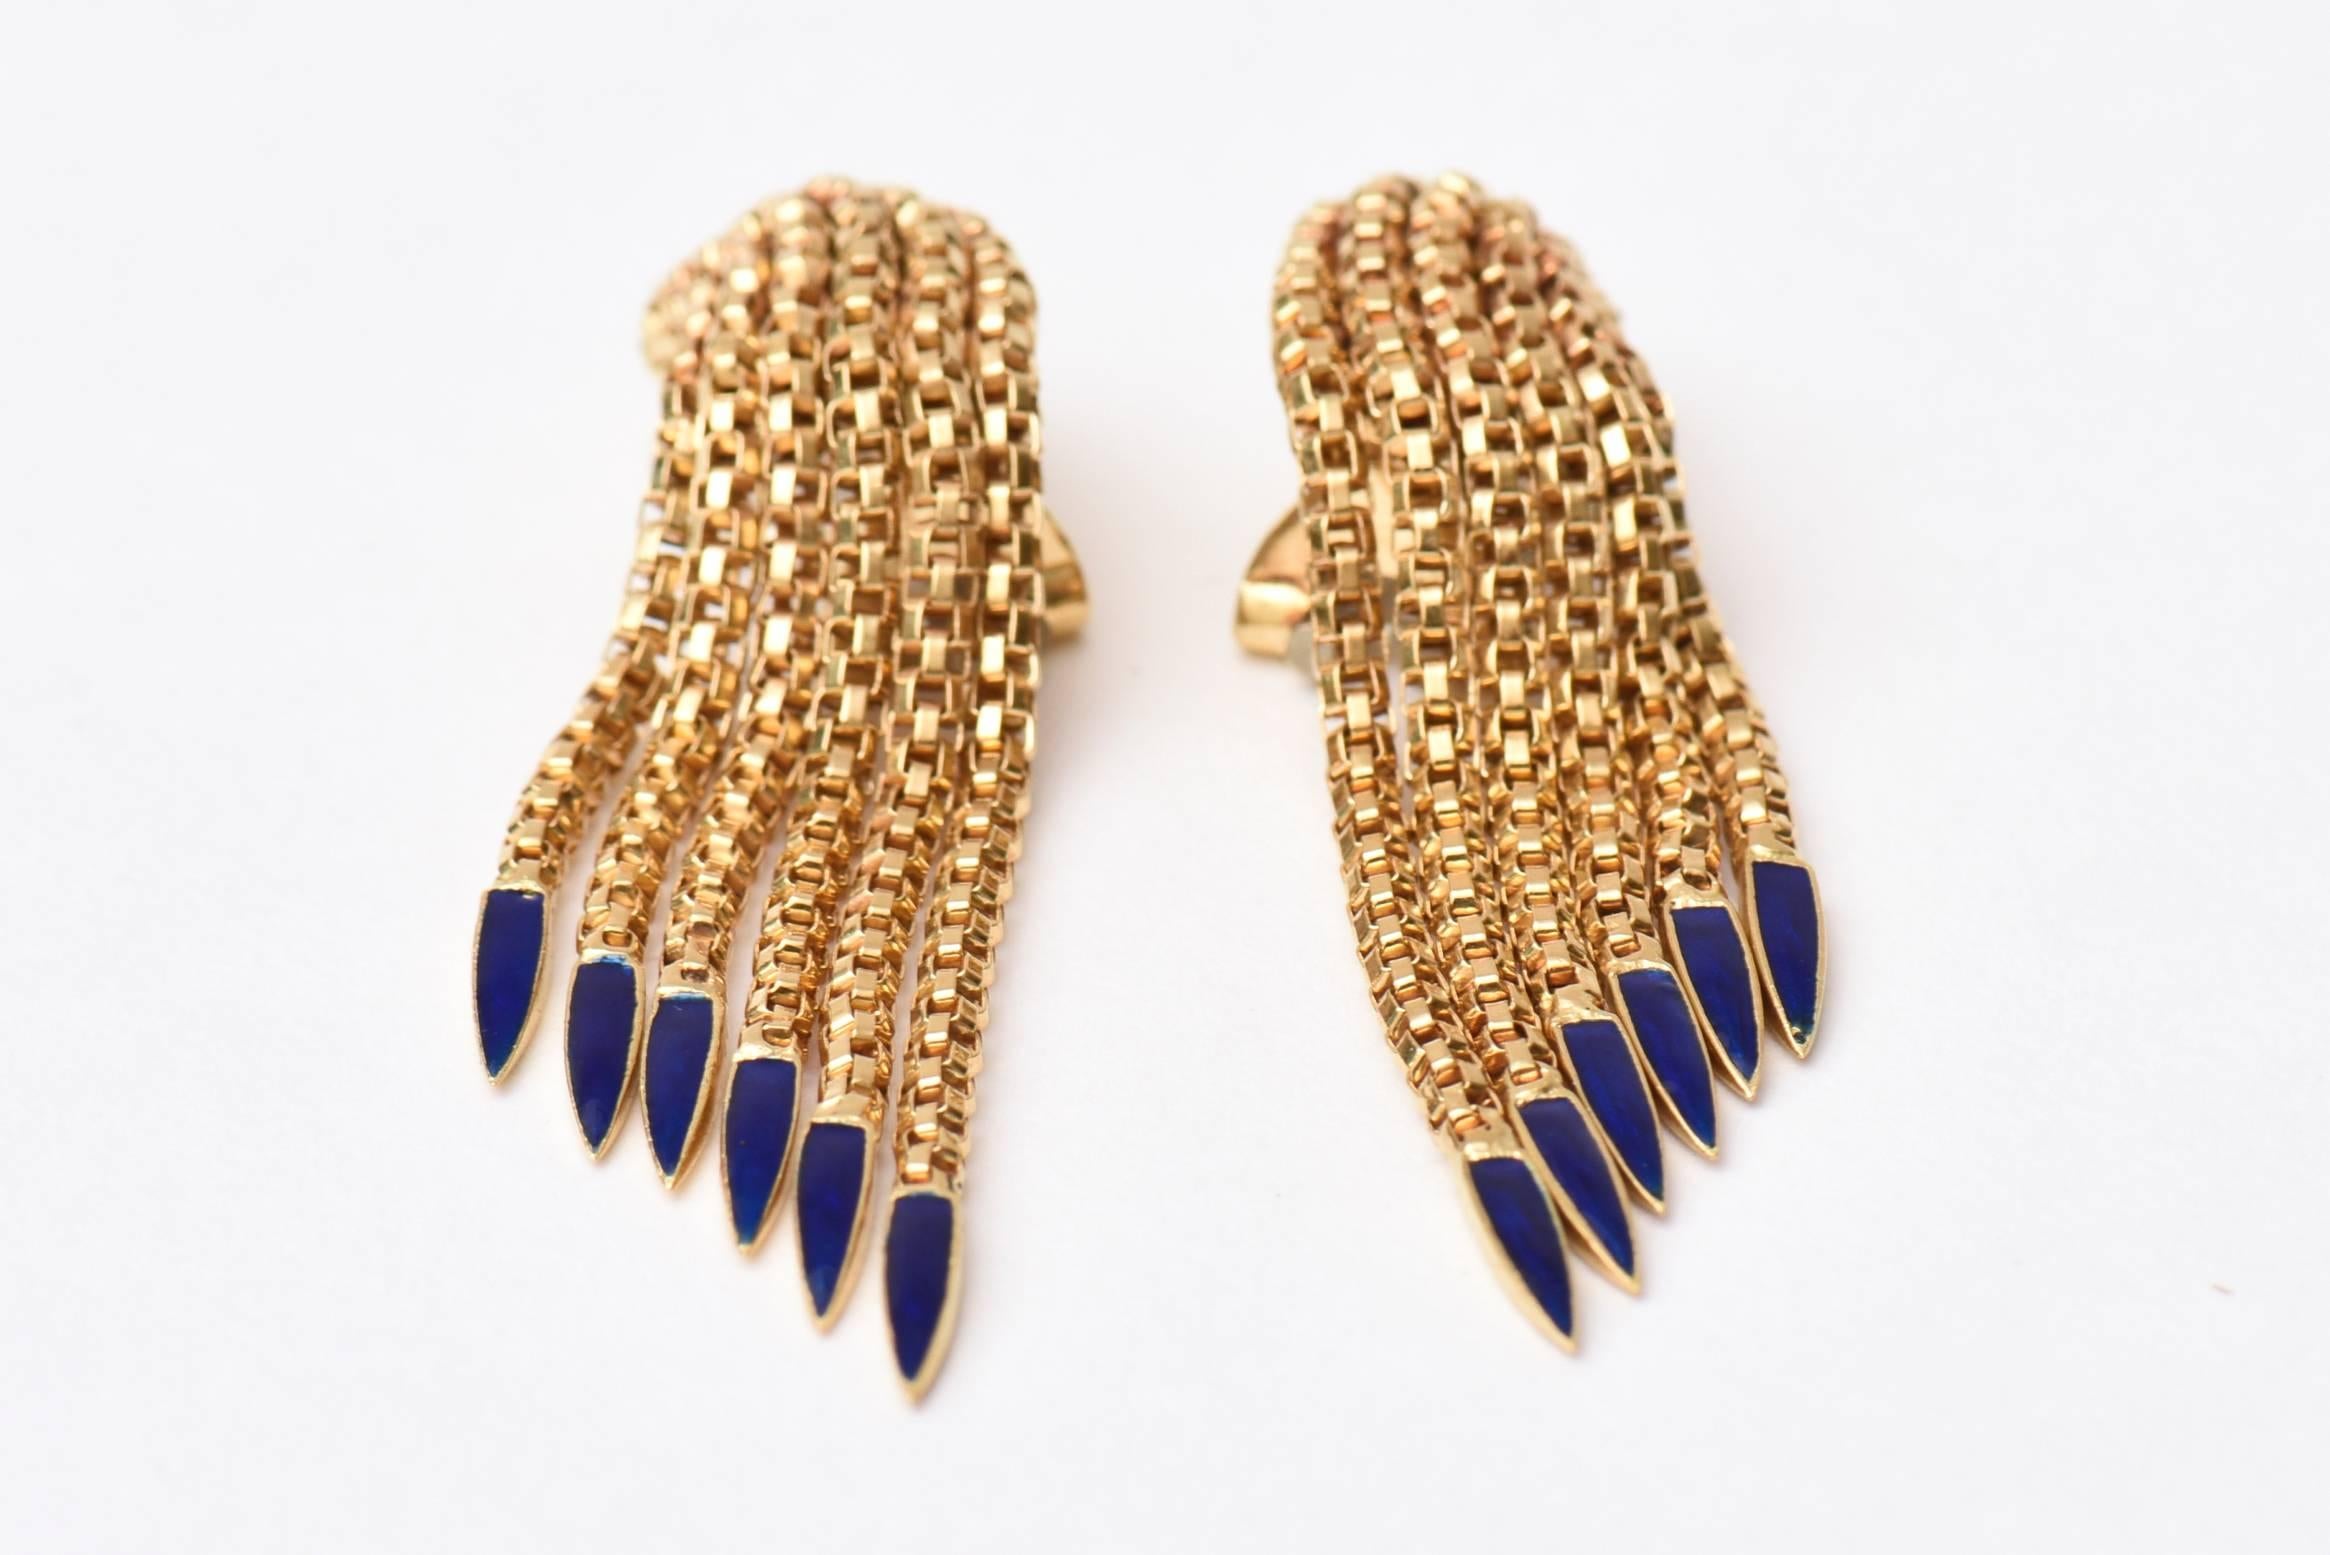 These spectacular and elegant pair of Italian stamped earrings have mesh like weave of 18K
gold with blue enamel tips. They look like wings.
They have an art deco look.
Stamped 18K and Italy.
9.3 DWT
Stunning and period.